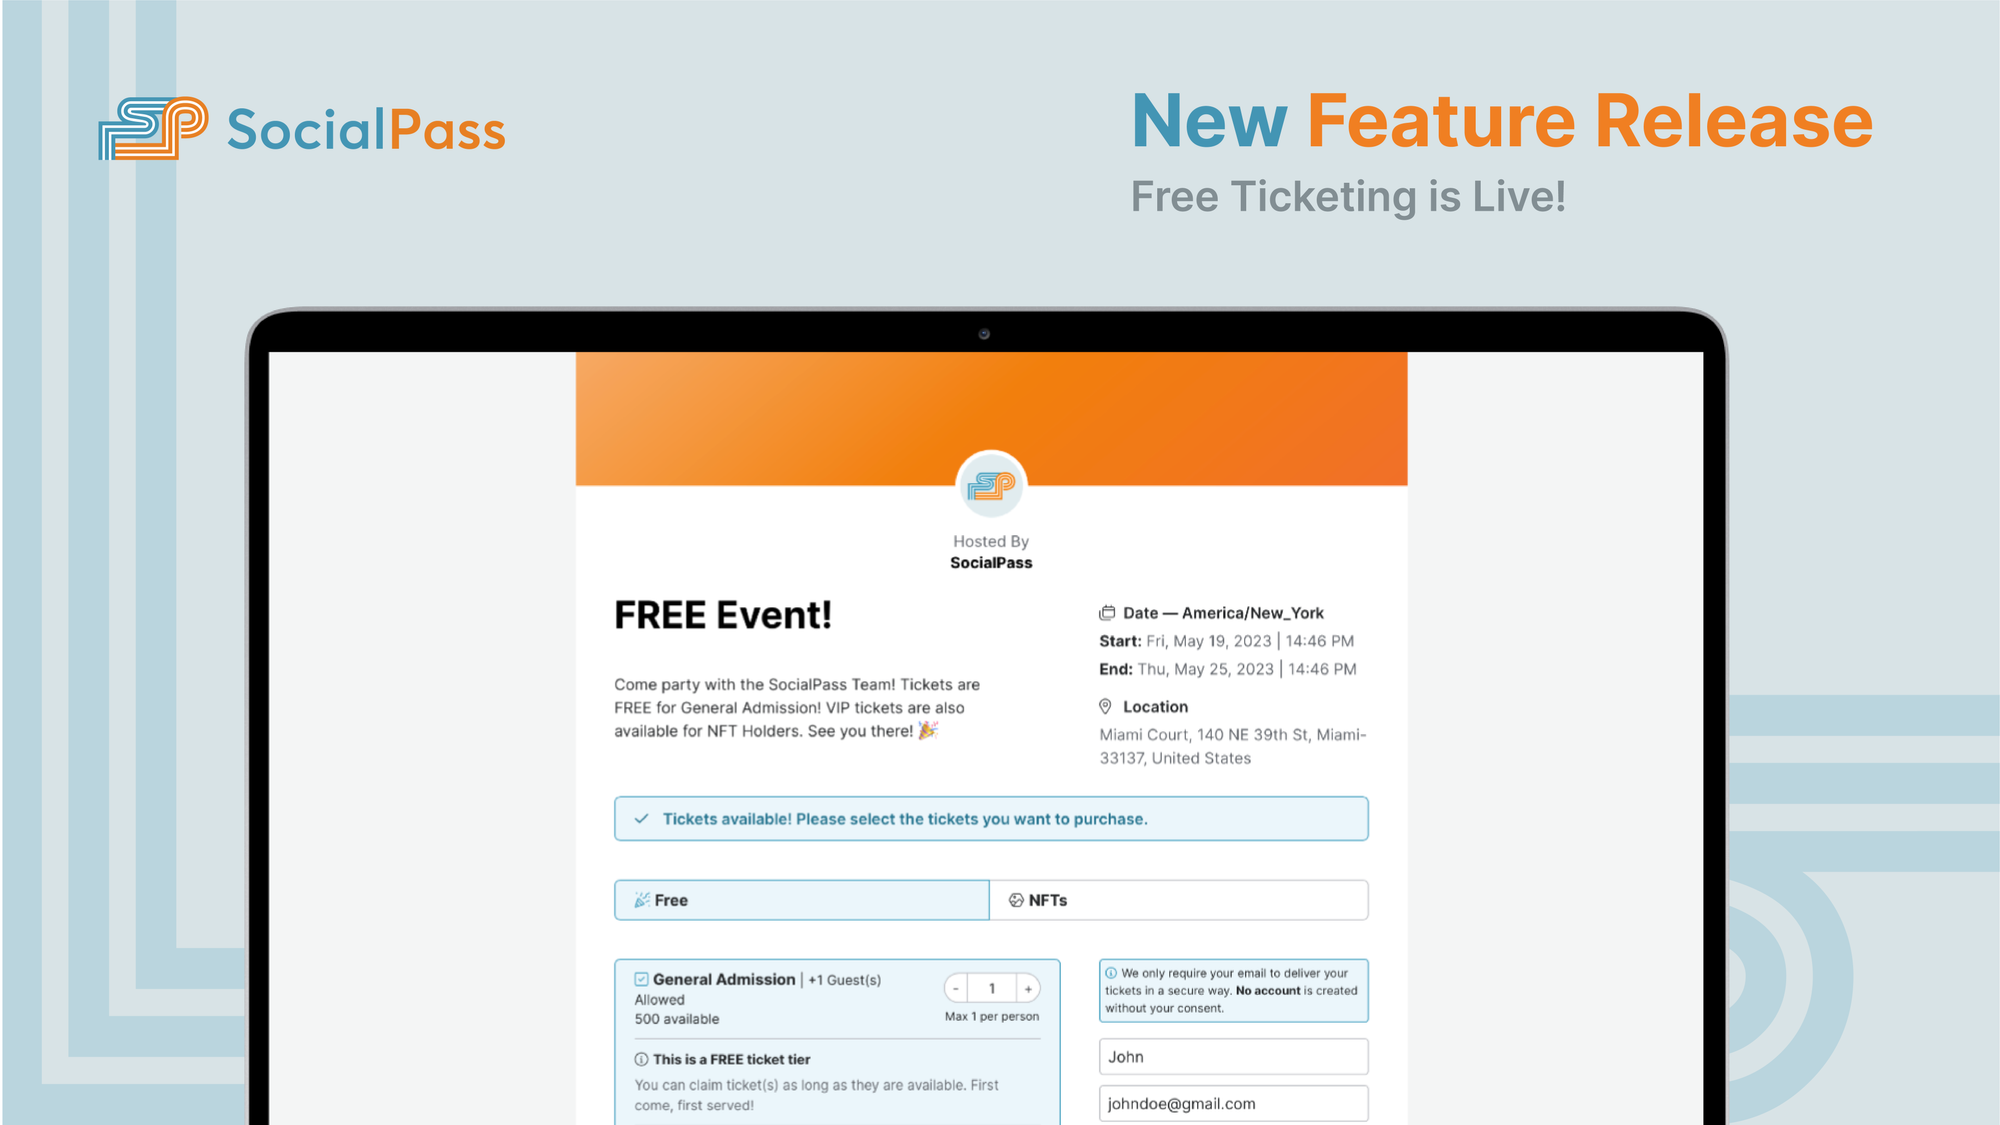 SocialPass Feature Release: Free Ticketing is Live!